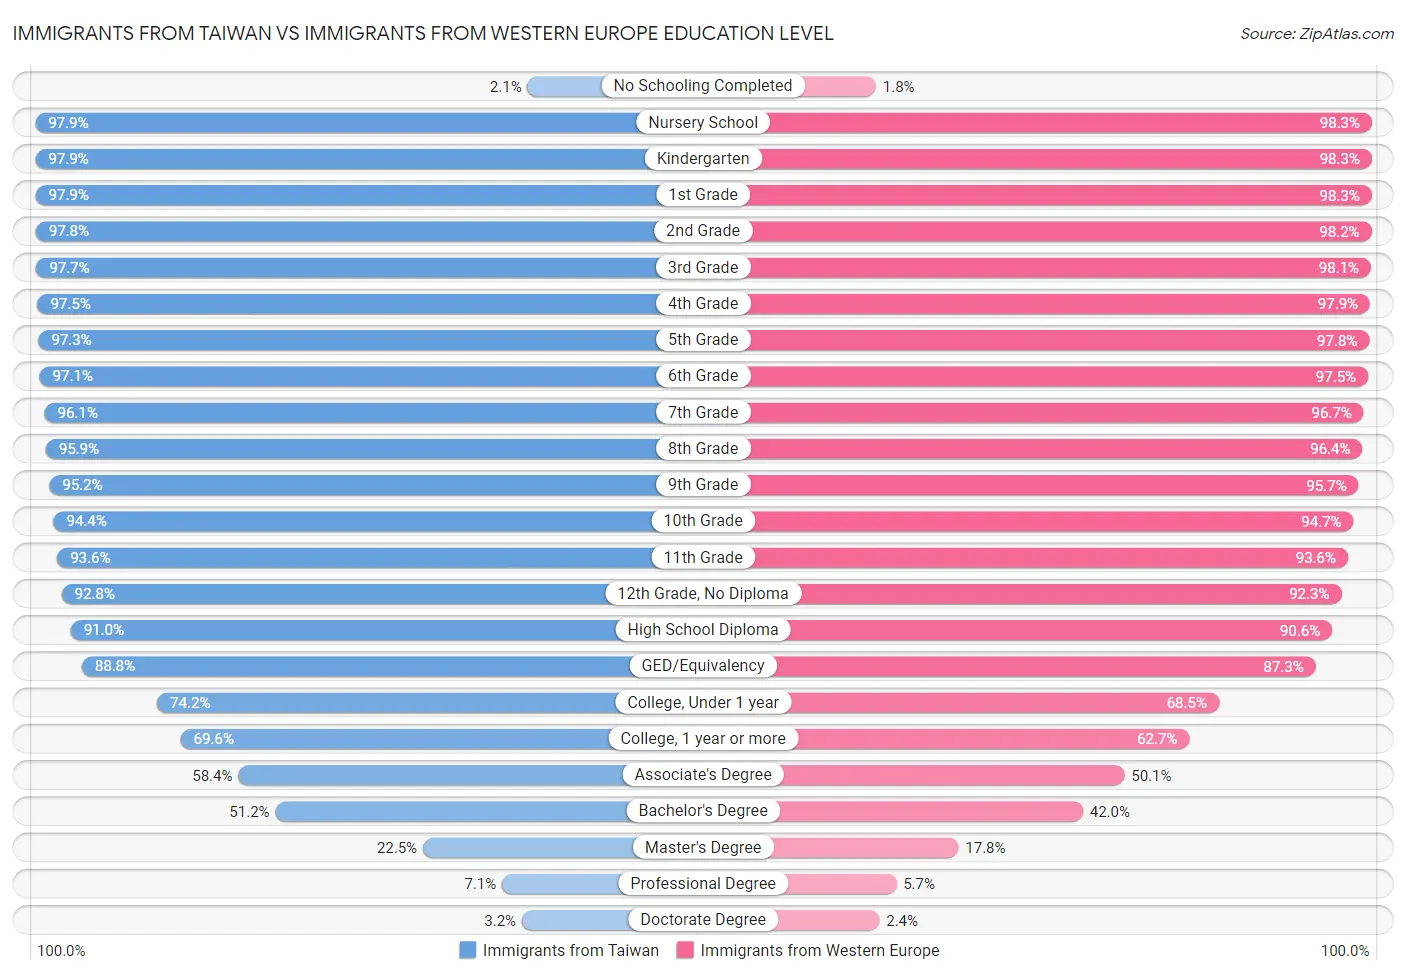 Immigrants from Taiwan vs Immigrants from Western Europe Education Level